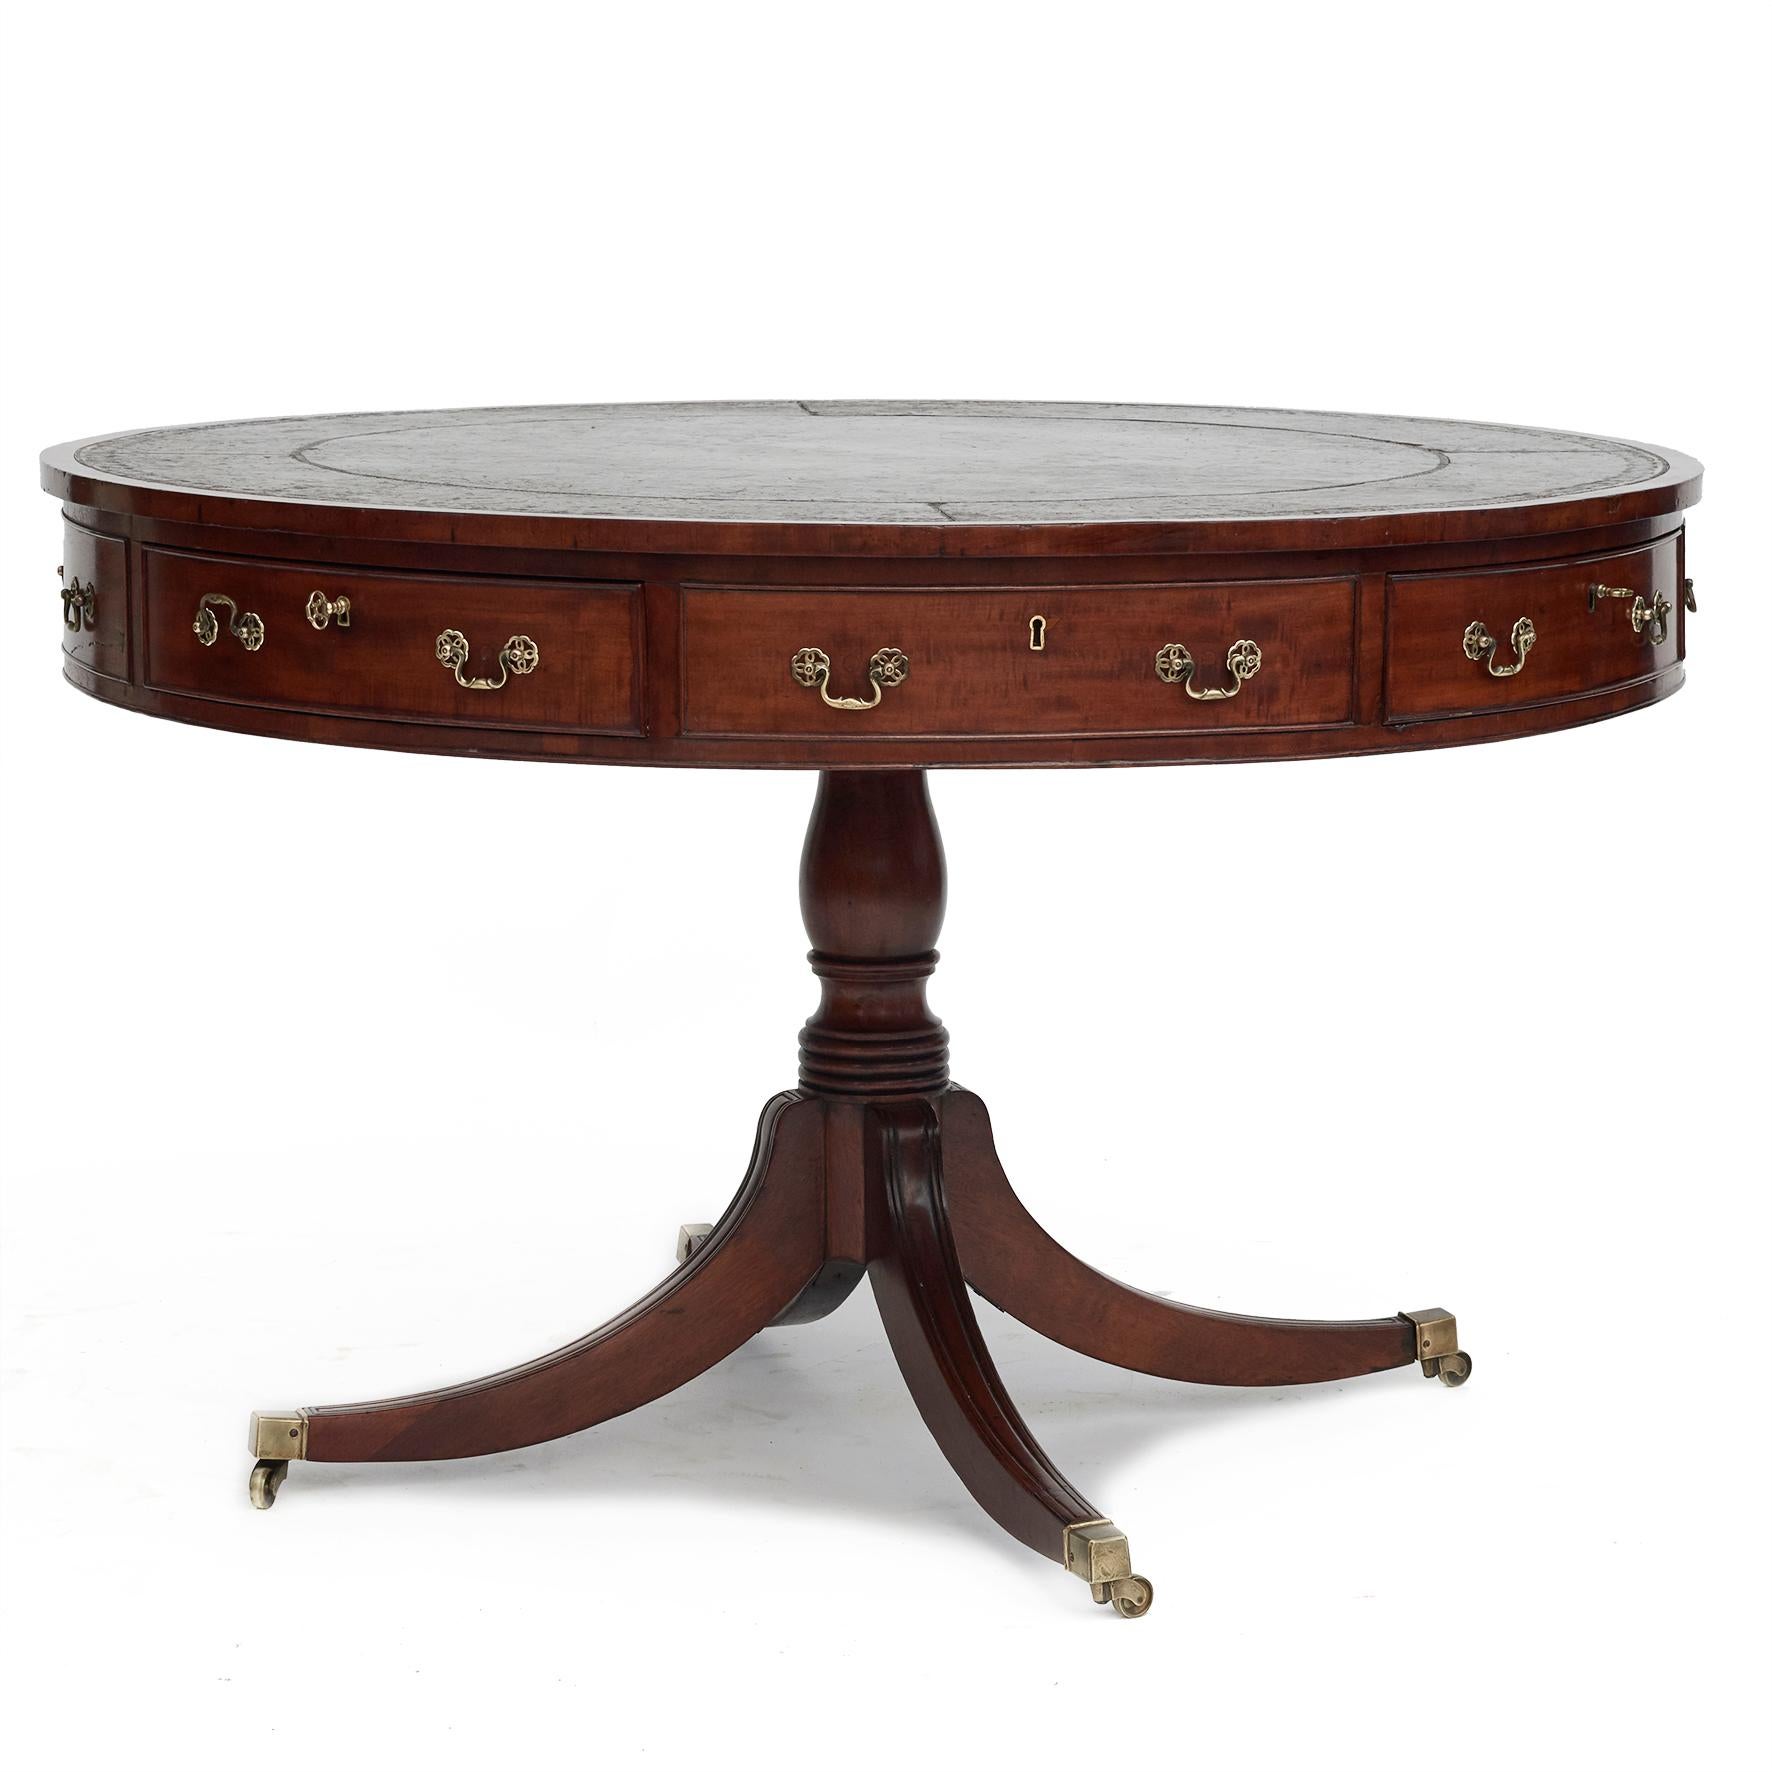 Regency period library drum table.
Mahogany frame with a circular embossed leather top with beautiful patina.
The table presents eight drawers on the apron, alternating false and working drawers with original brass fittings.
Raised on a turned